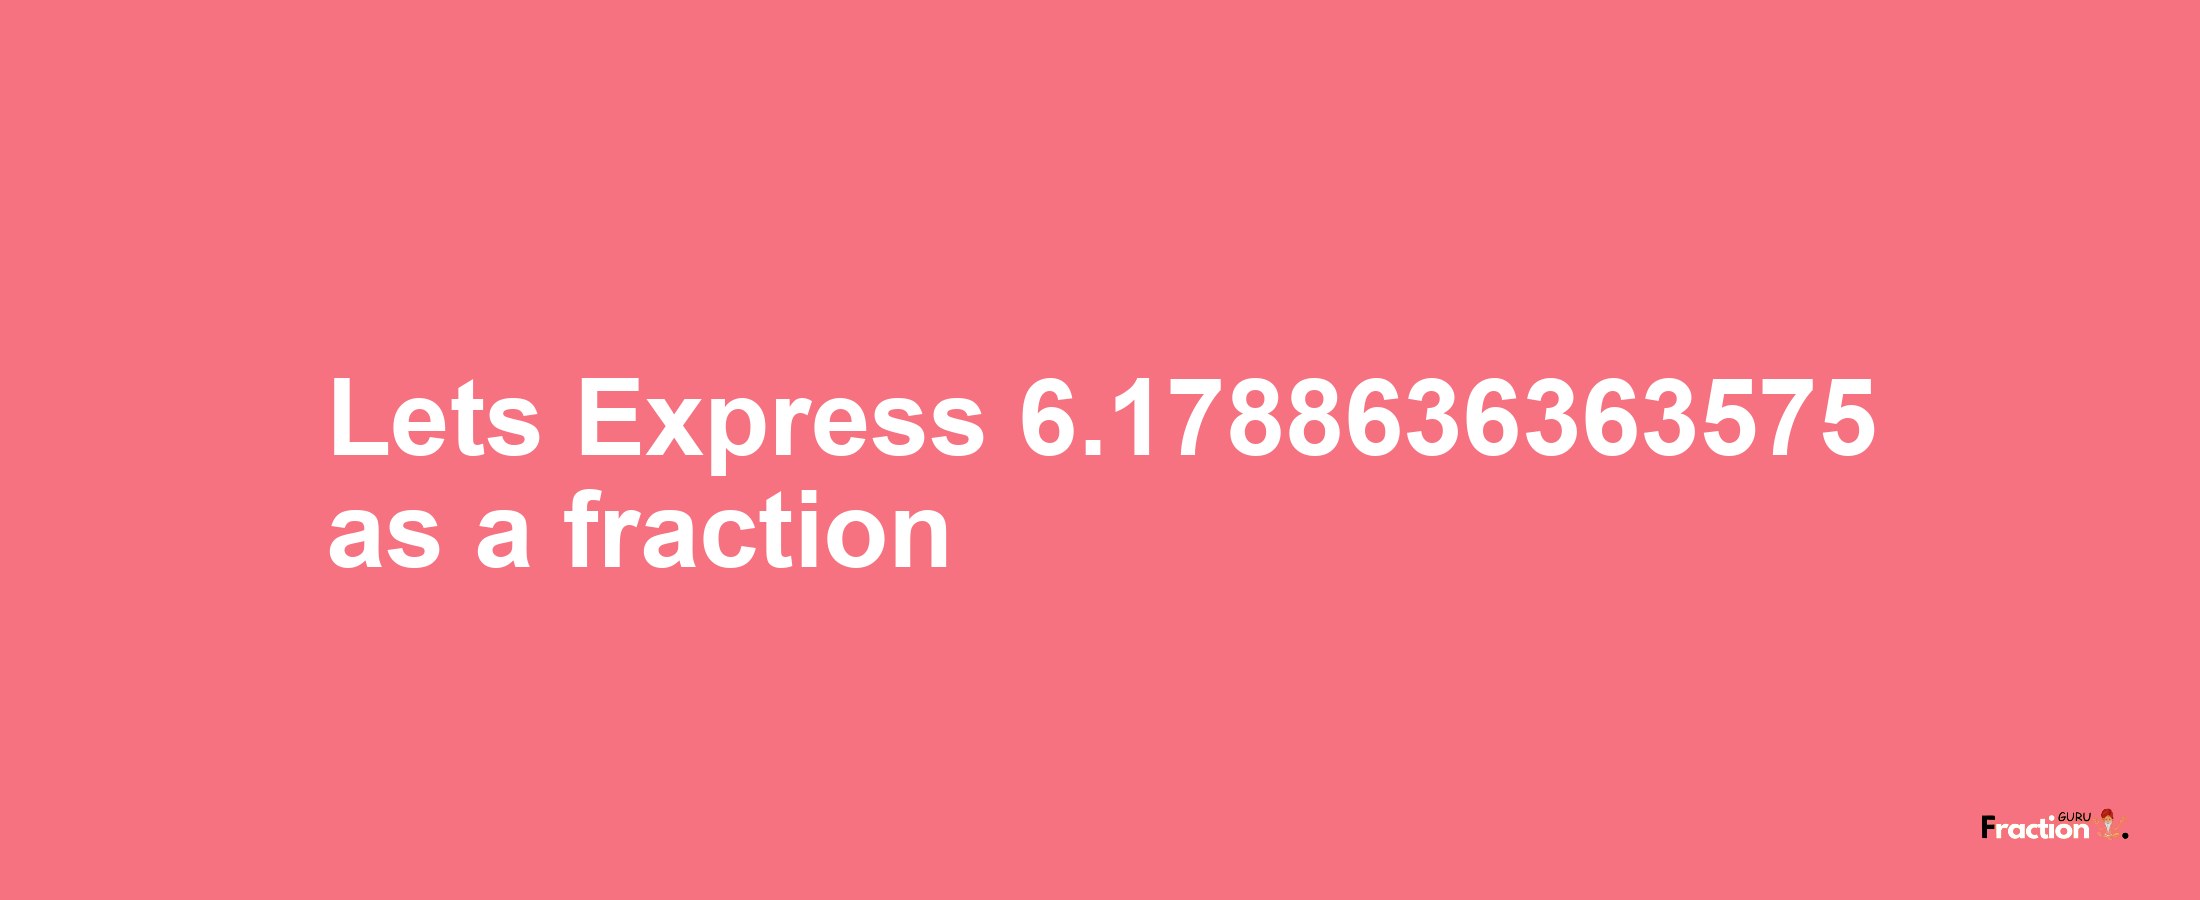 Lets Express 6.1788636363575 as afraction